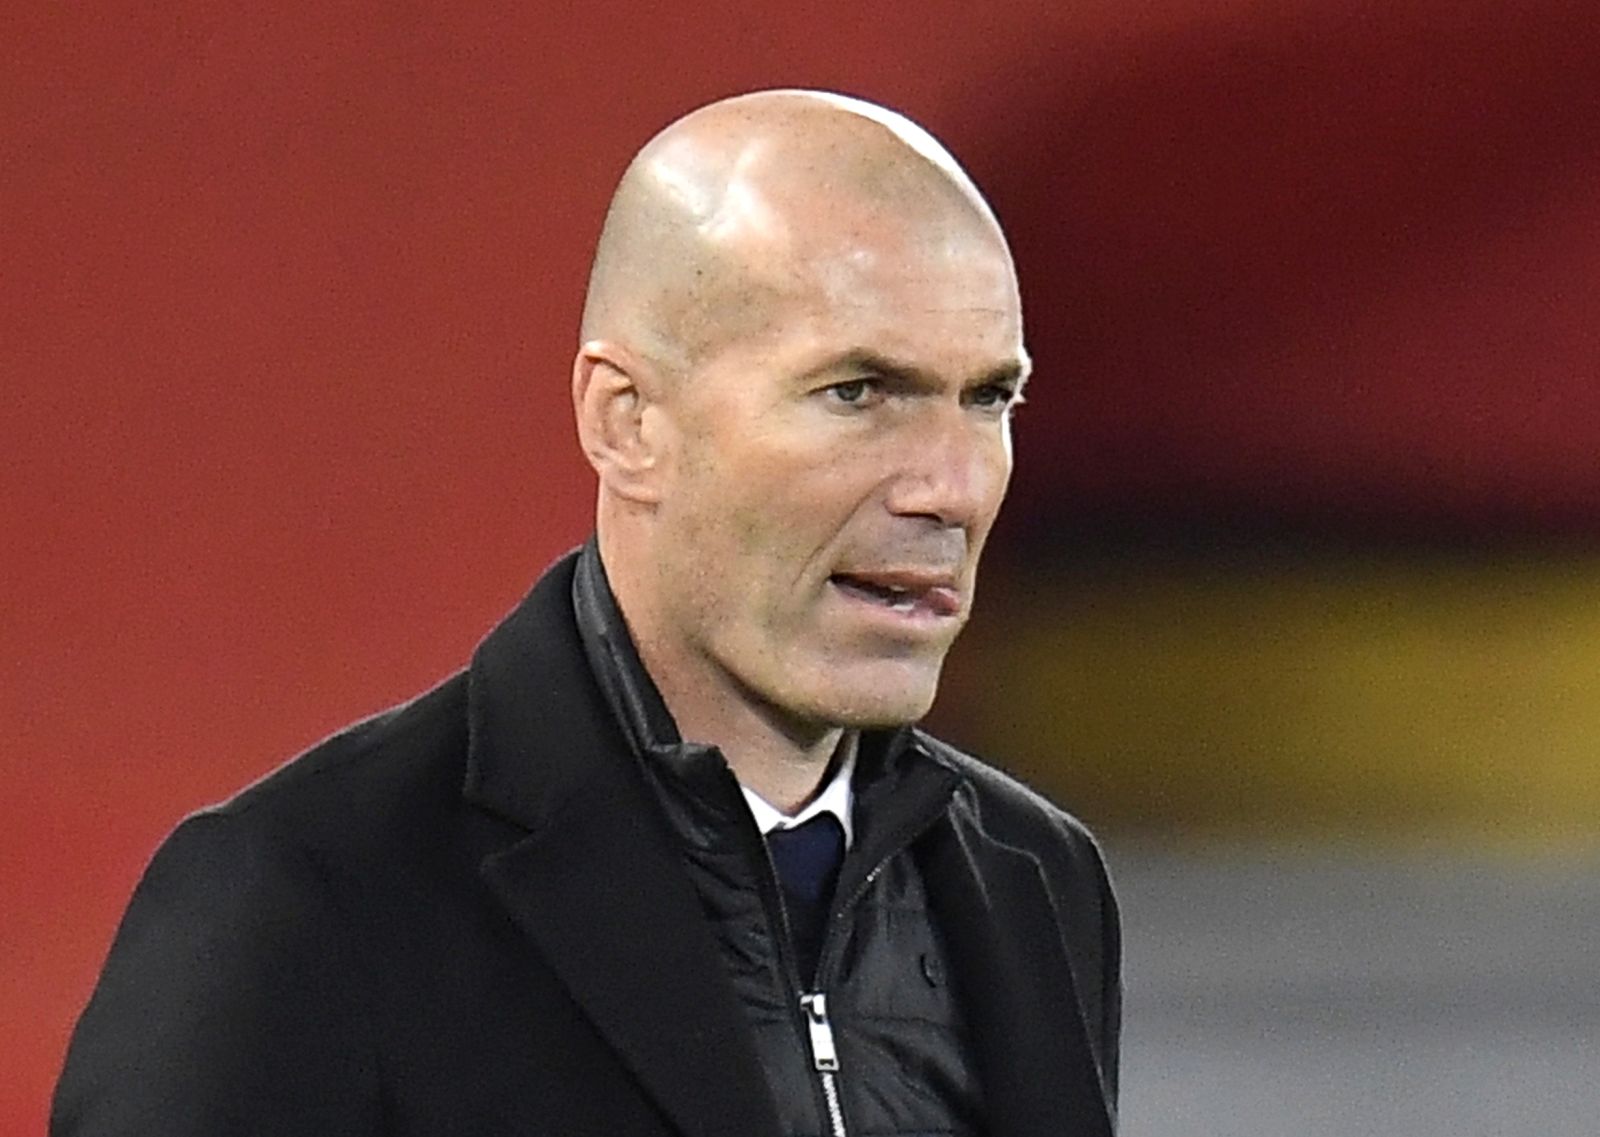 epa09135713 Real Madrid's head coach Zinedine Zidane reacts during the UEFA Champions League quarter final, second leg soccer match between Liverpool FC and Real Madrid in Liverpool, Britain, 14 April 2021.  EPA/Peter Powell